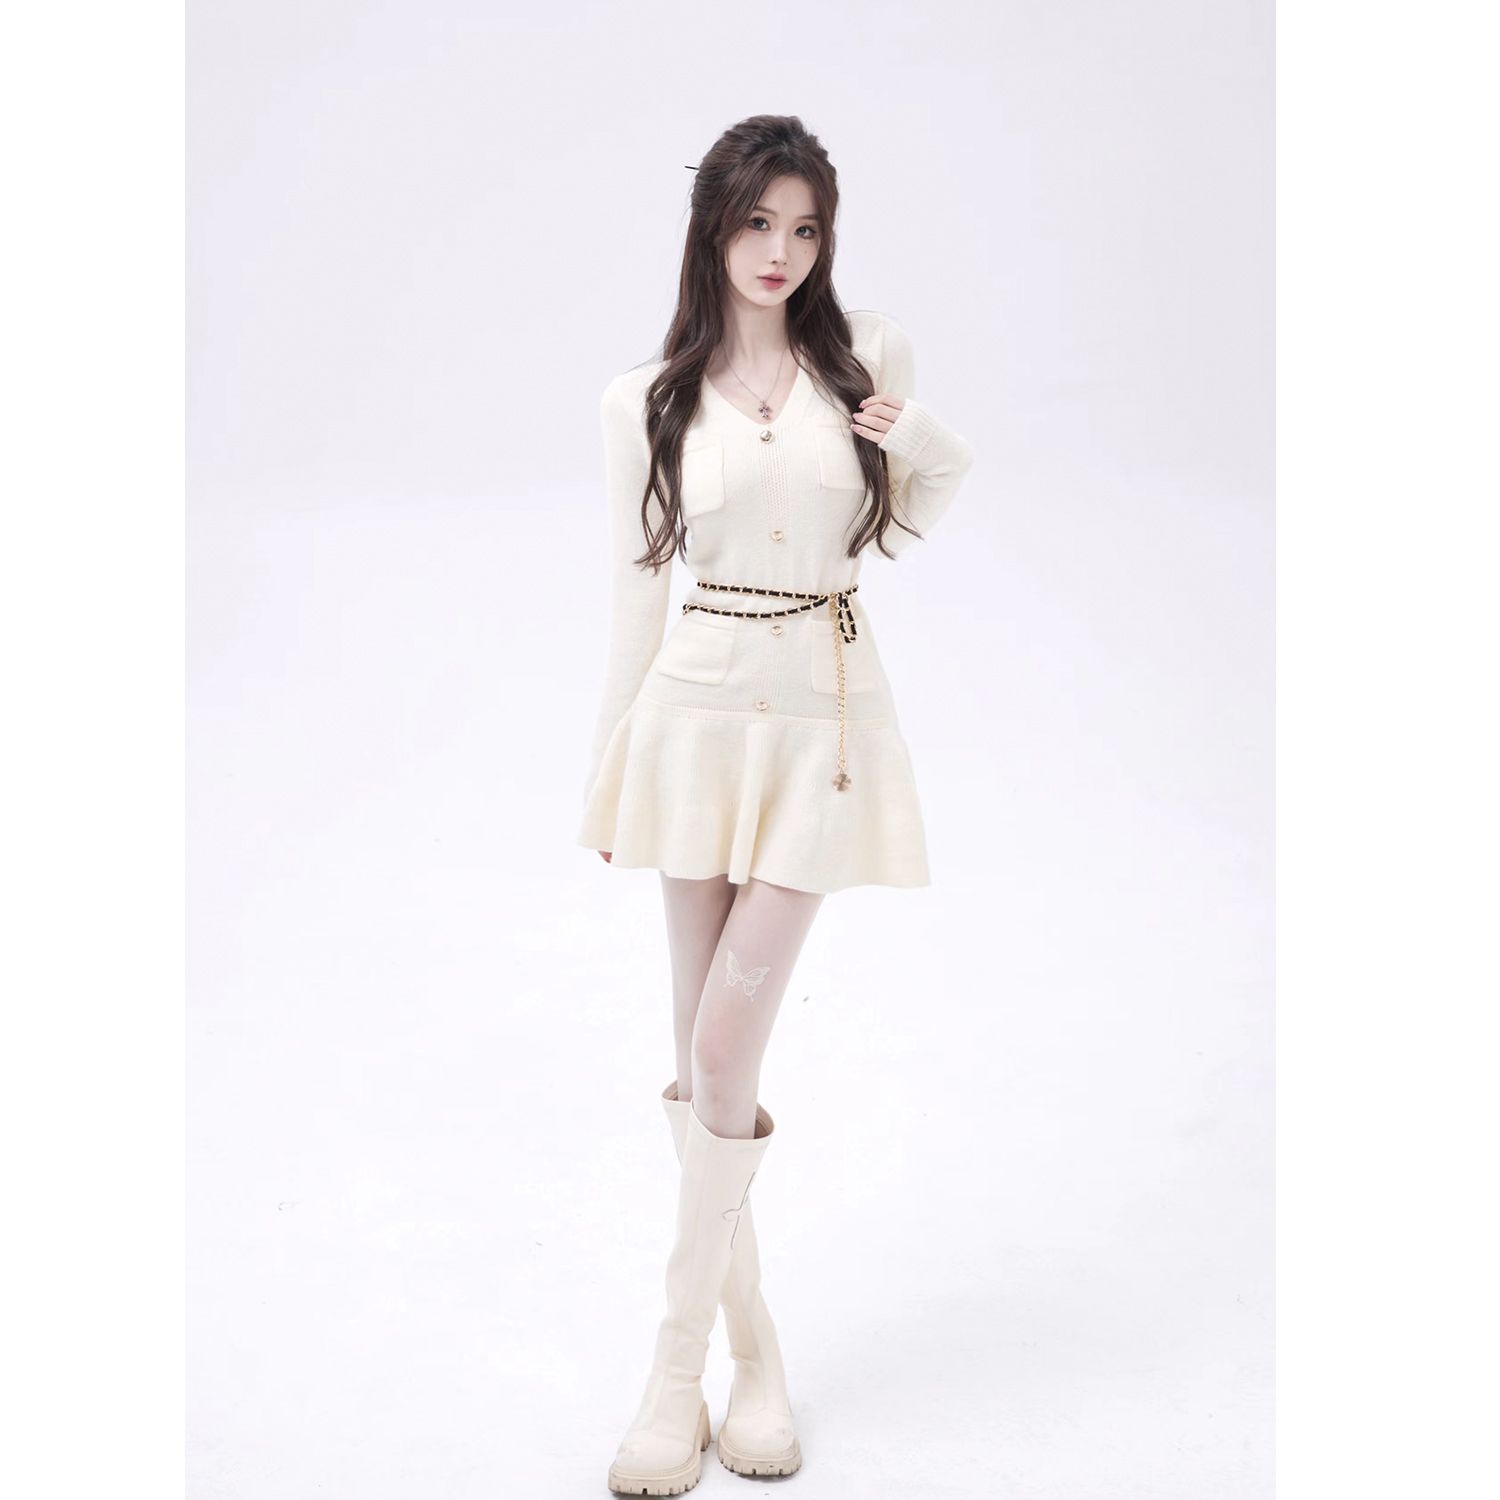 JMSHOP What to use to resist Yujie Design sense long-sleeved pure desire knitted dress sexy short sweater dress